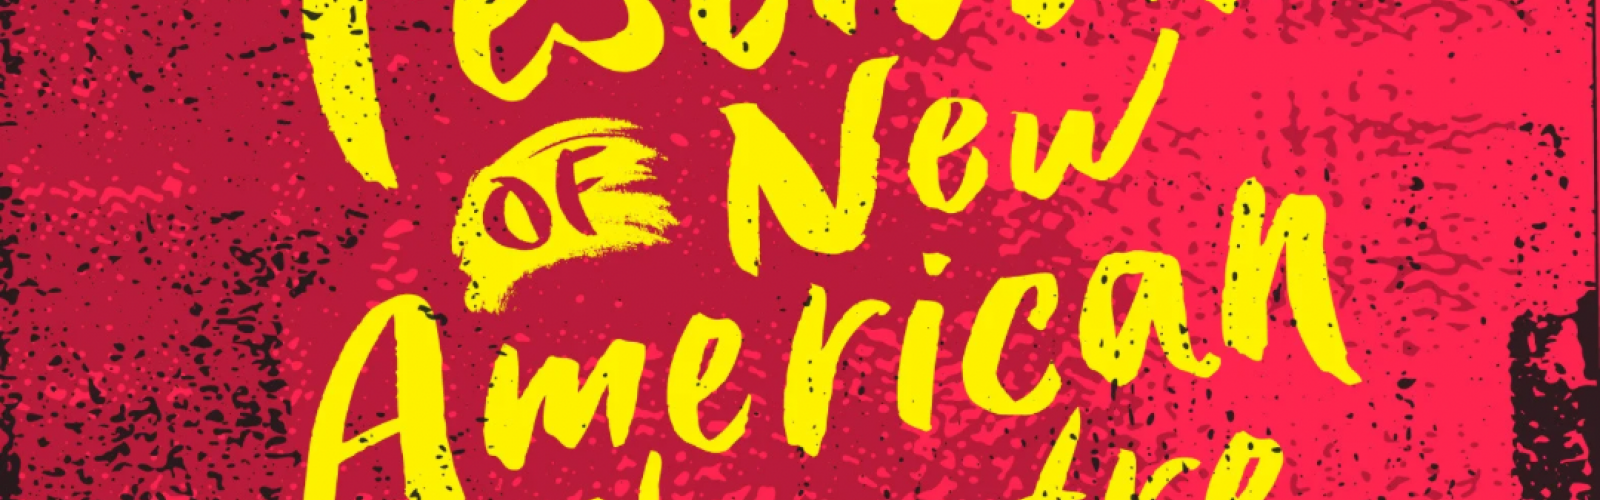 Festival of New American Theatre logo on a red background with the text The 24 Hour Theatre Project in the bottom right